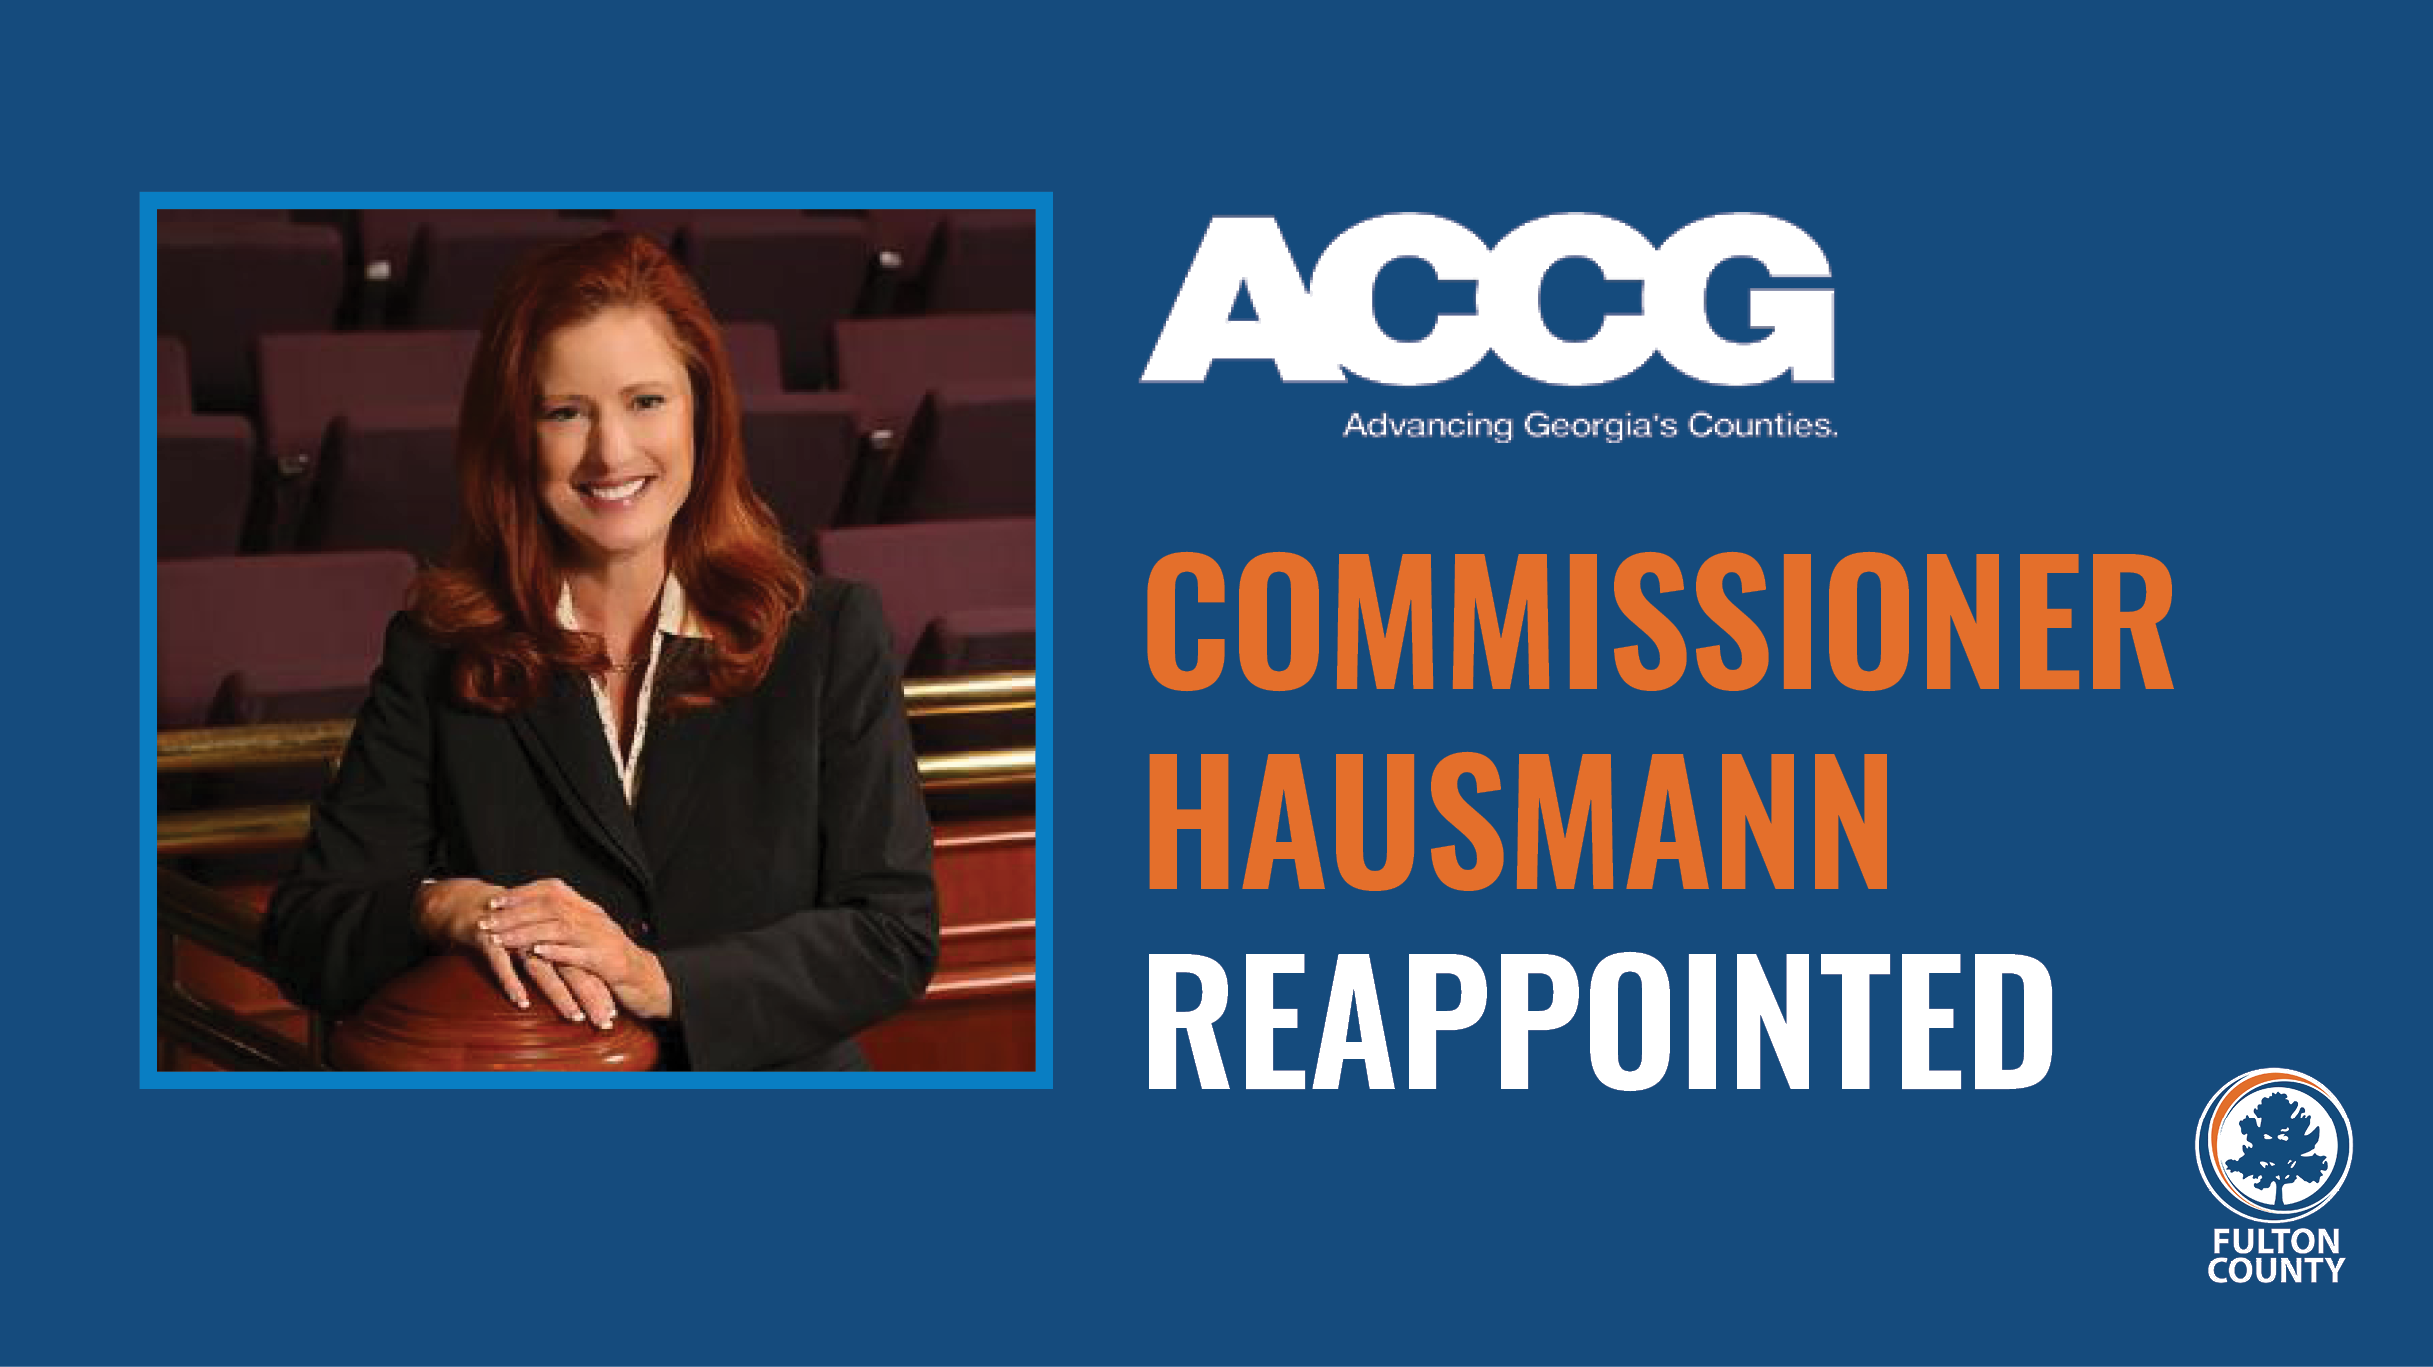 Hausmann ACCG reappointment